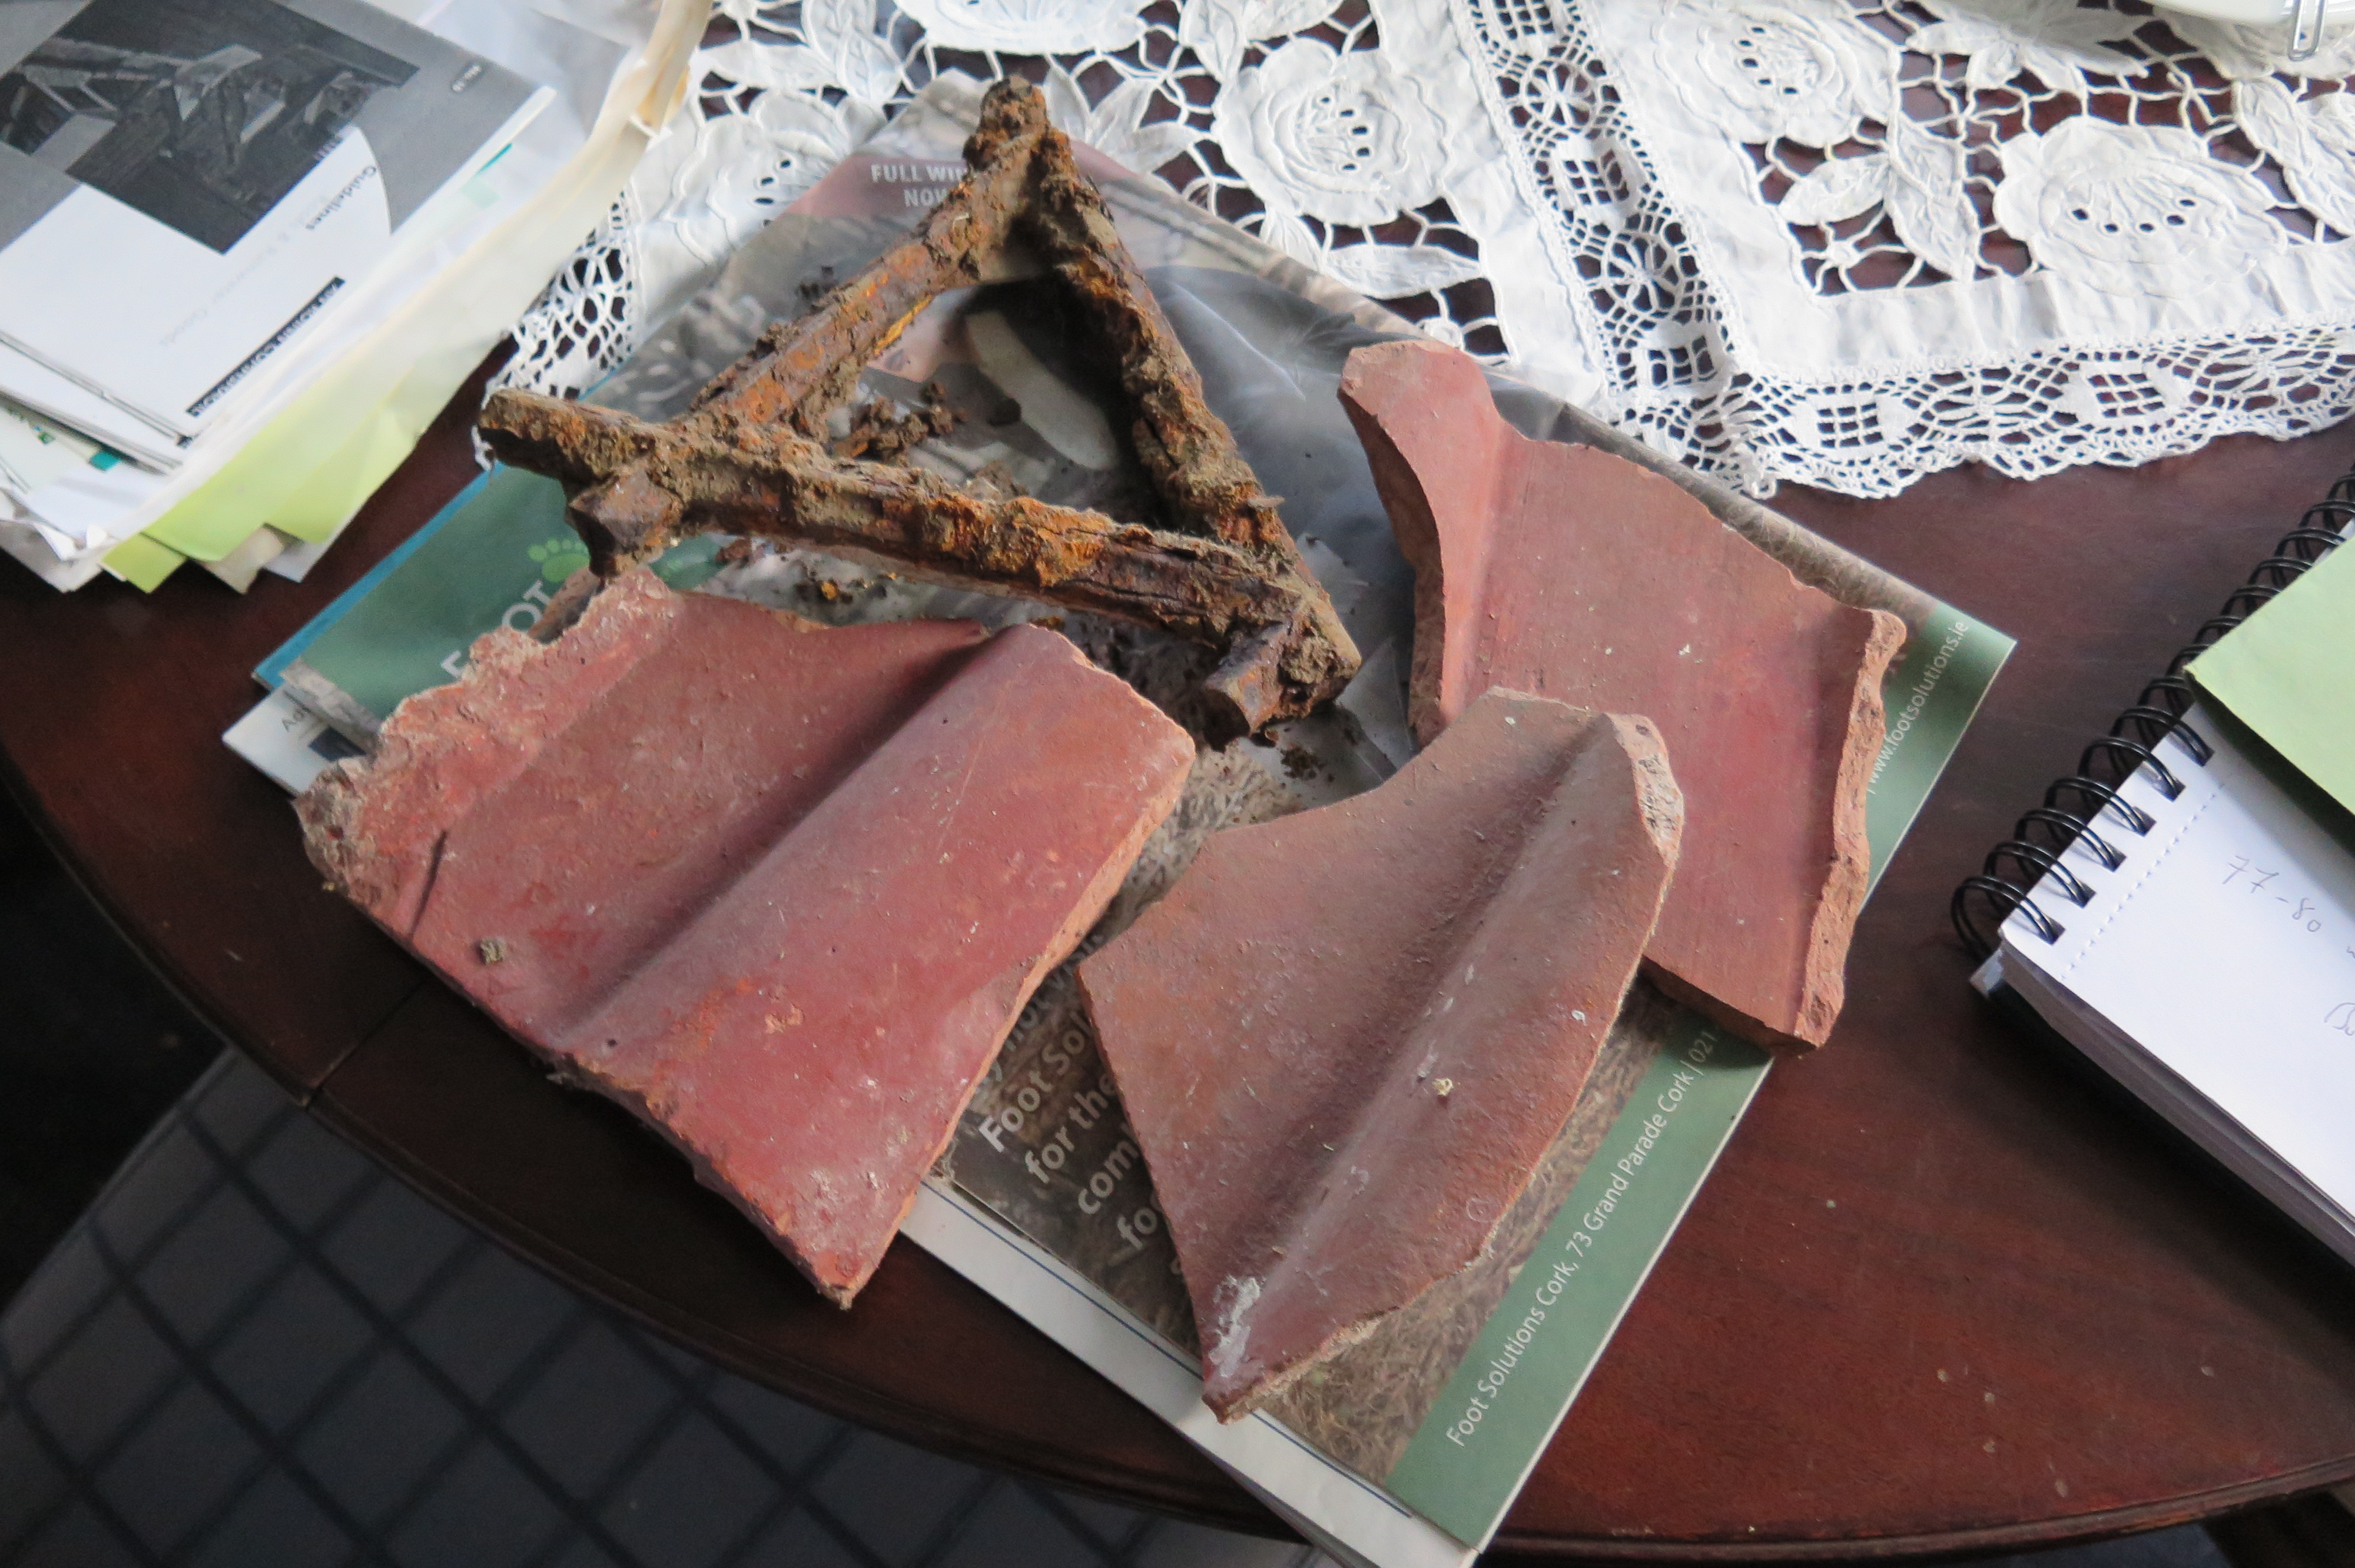 Fragments of Original Red Tiles from the Lodge